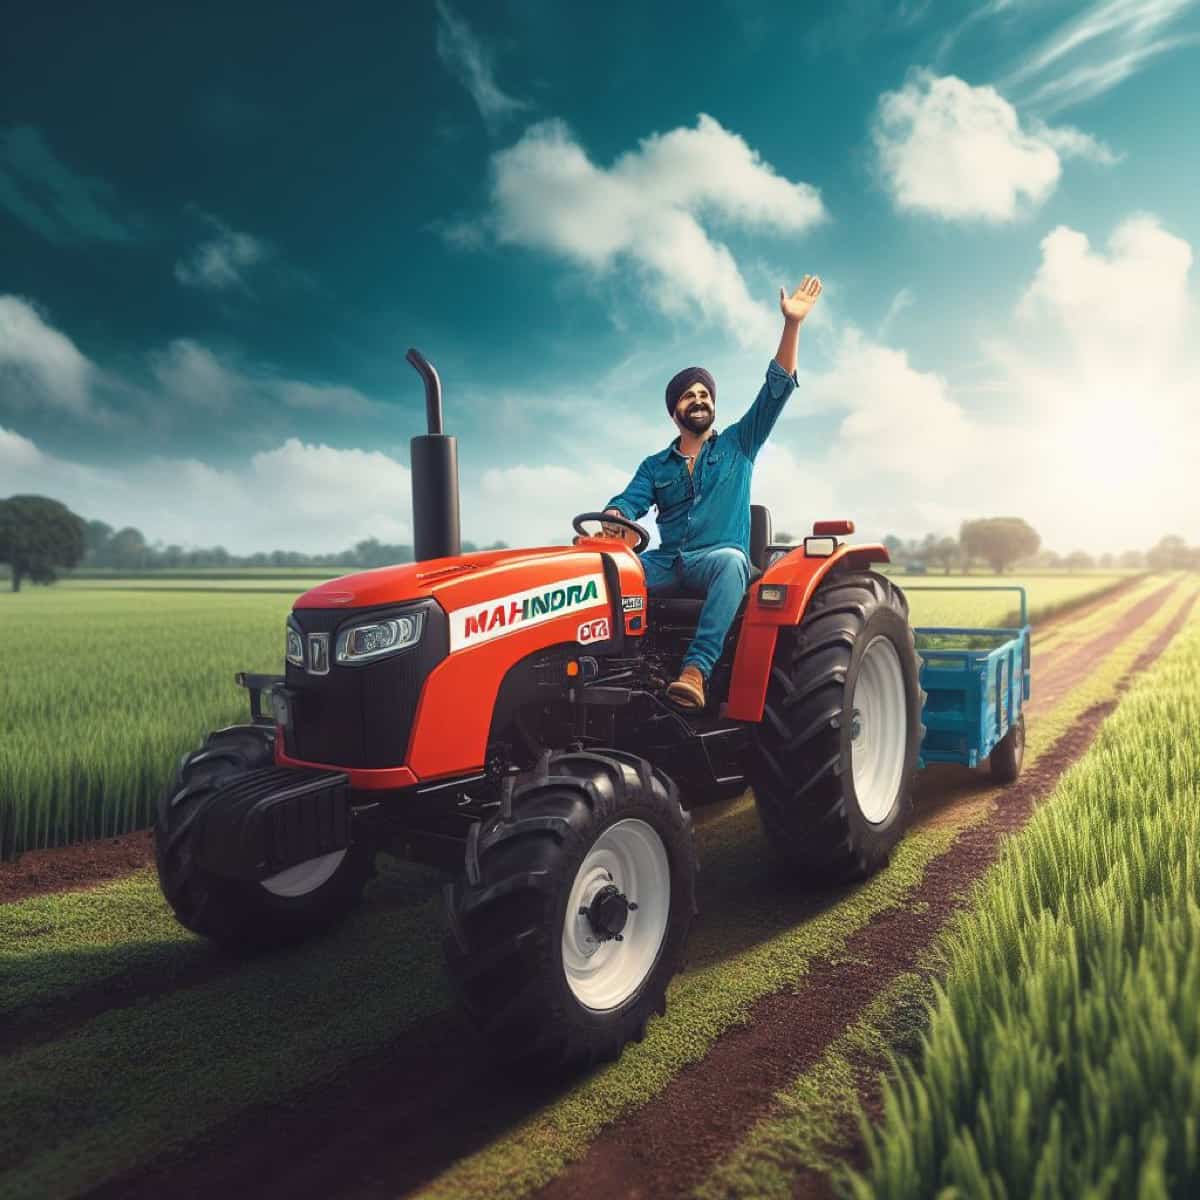 Everything you want to know about the Mahindra Oja tractor: features, specifications, prices of different models